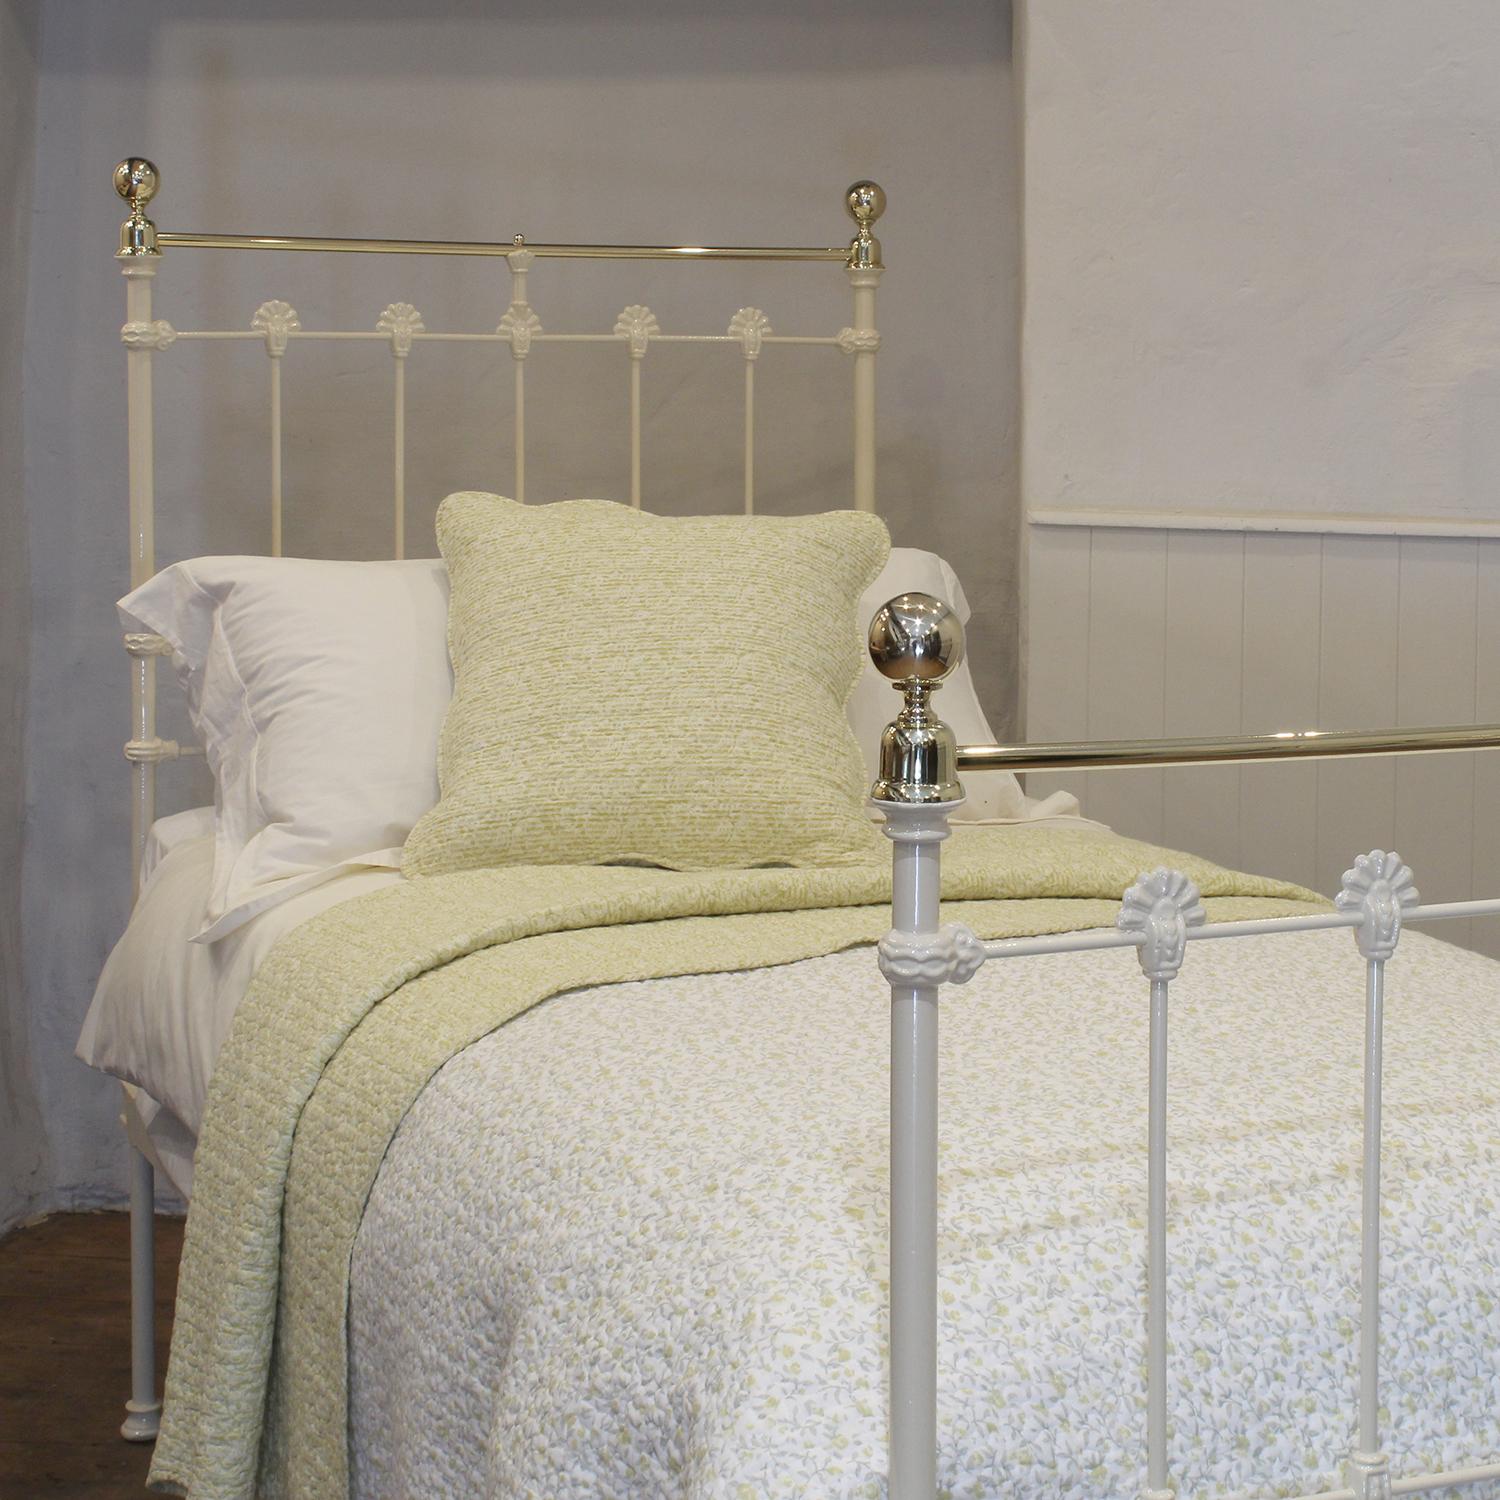 British Traditional Single Victorian Brass and Iron Antique Bed in Cream MS71